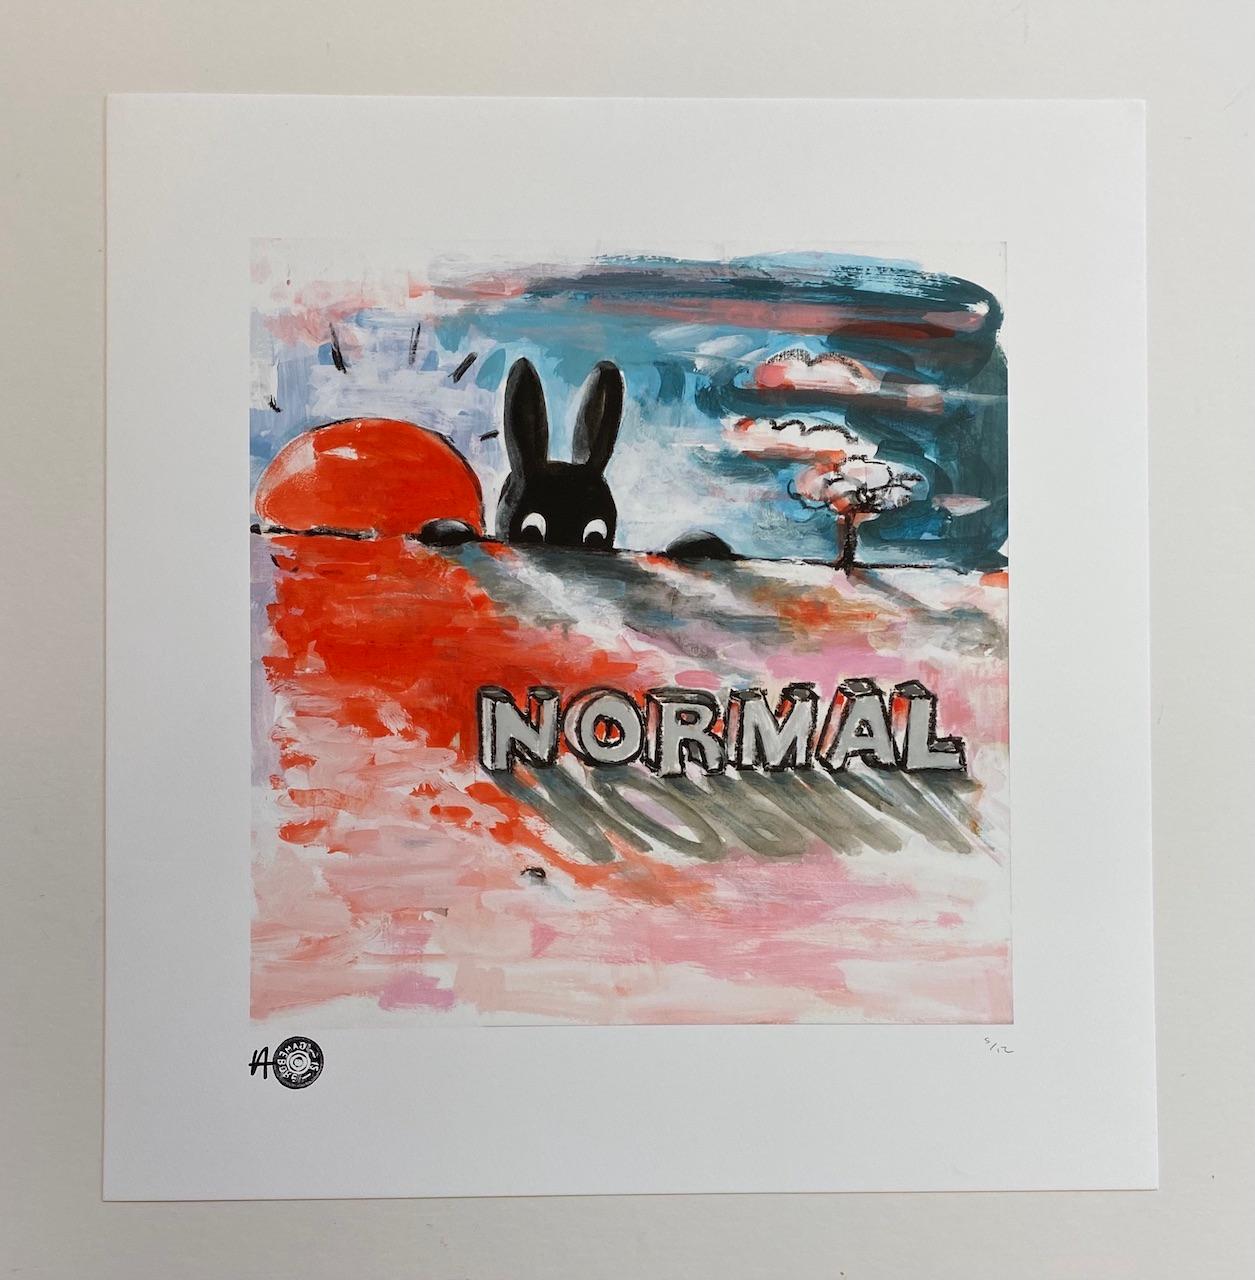 The New Normal, Limited edition print, Bunny, Animal print, Sunset  - Abstrait Print par Harry Bunce